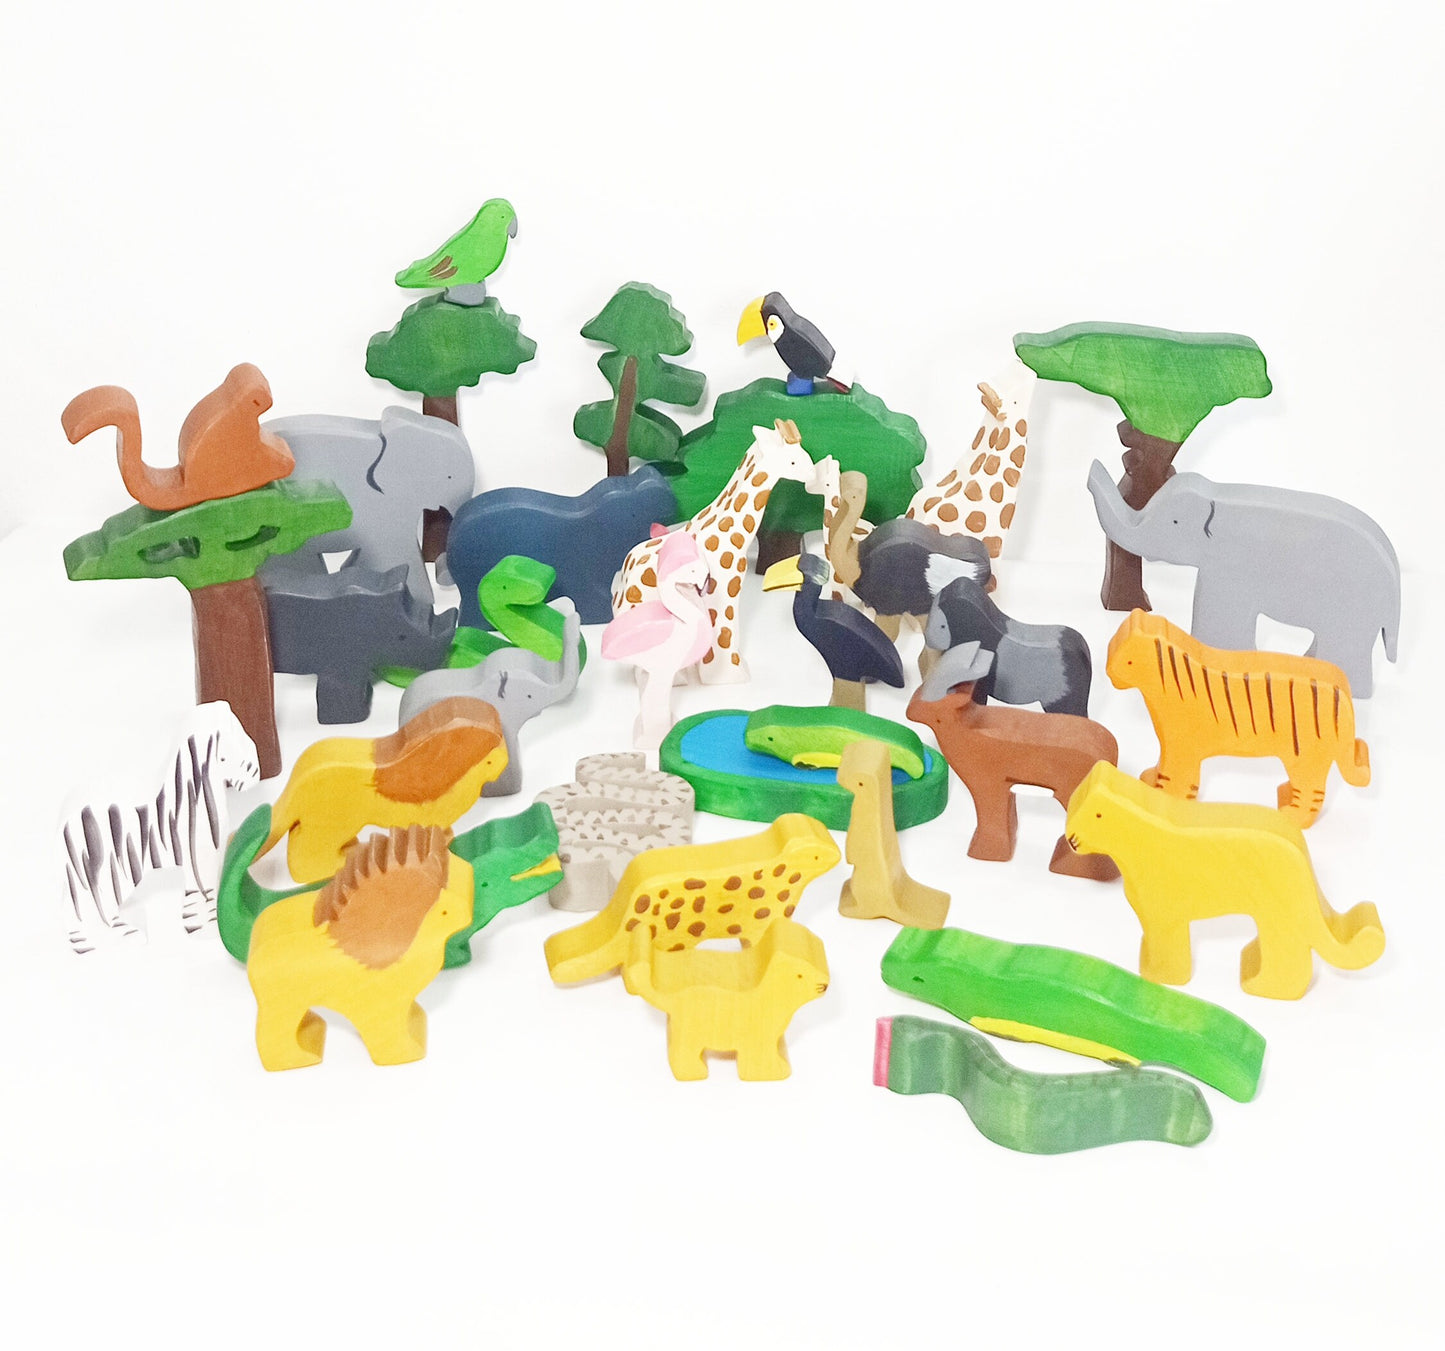 Safari exotic animals wooden toy 36pieces set, wooden animals toy set, waldorf inspired wooden animals, christmas birthday gift for kids